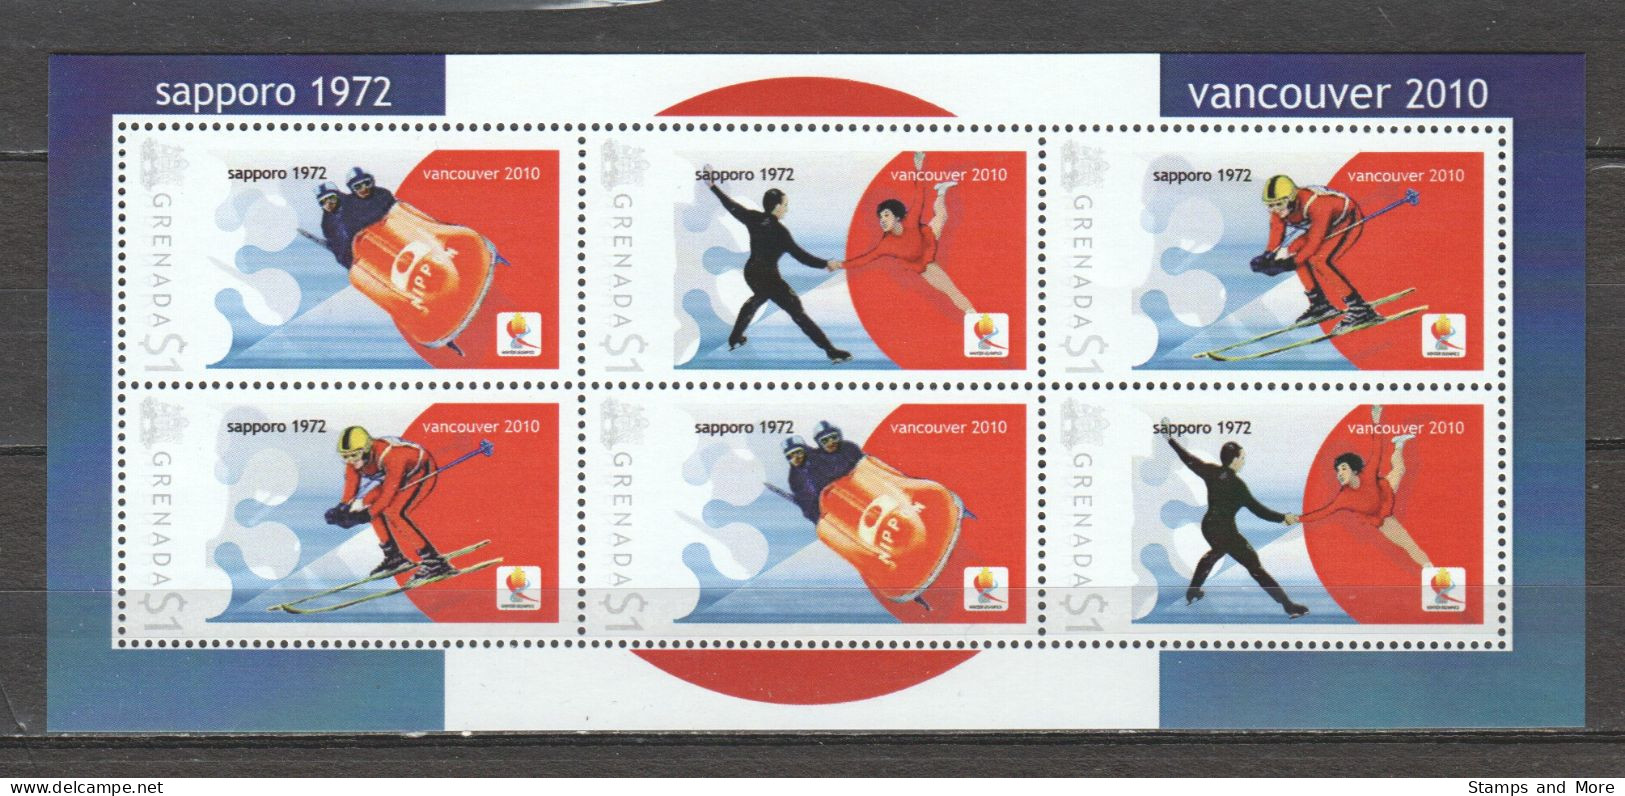 Grenada - Limited Edition Sheet 11 MNH - WINTER OLYMPICS VANCOUVER 2010 - SAPORRO 1972 - Winter 2010: Vancouver